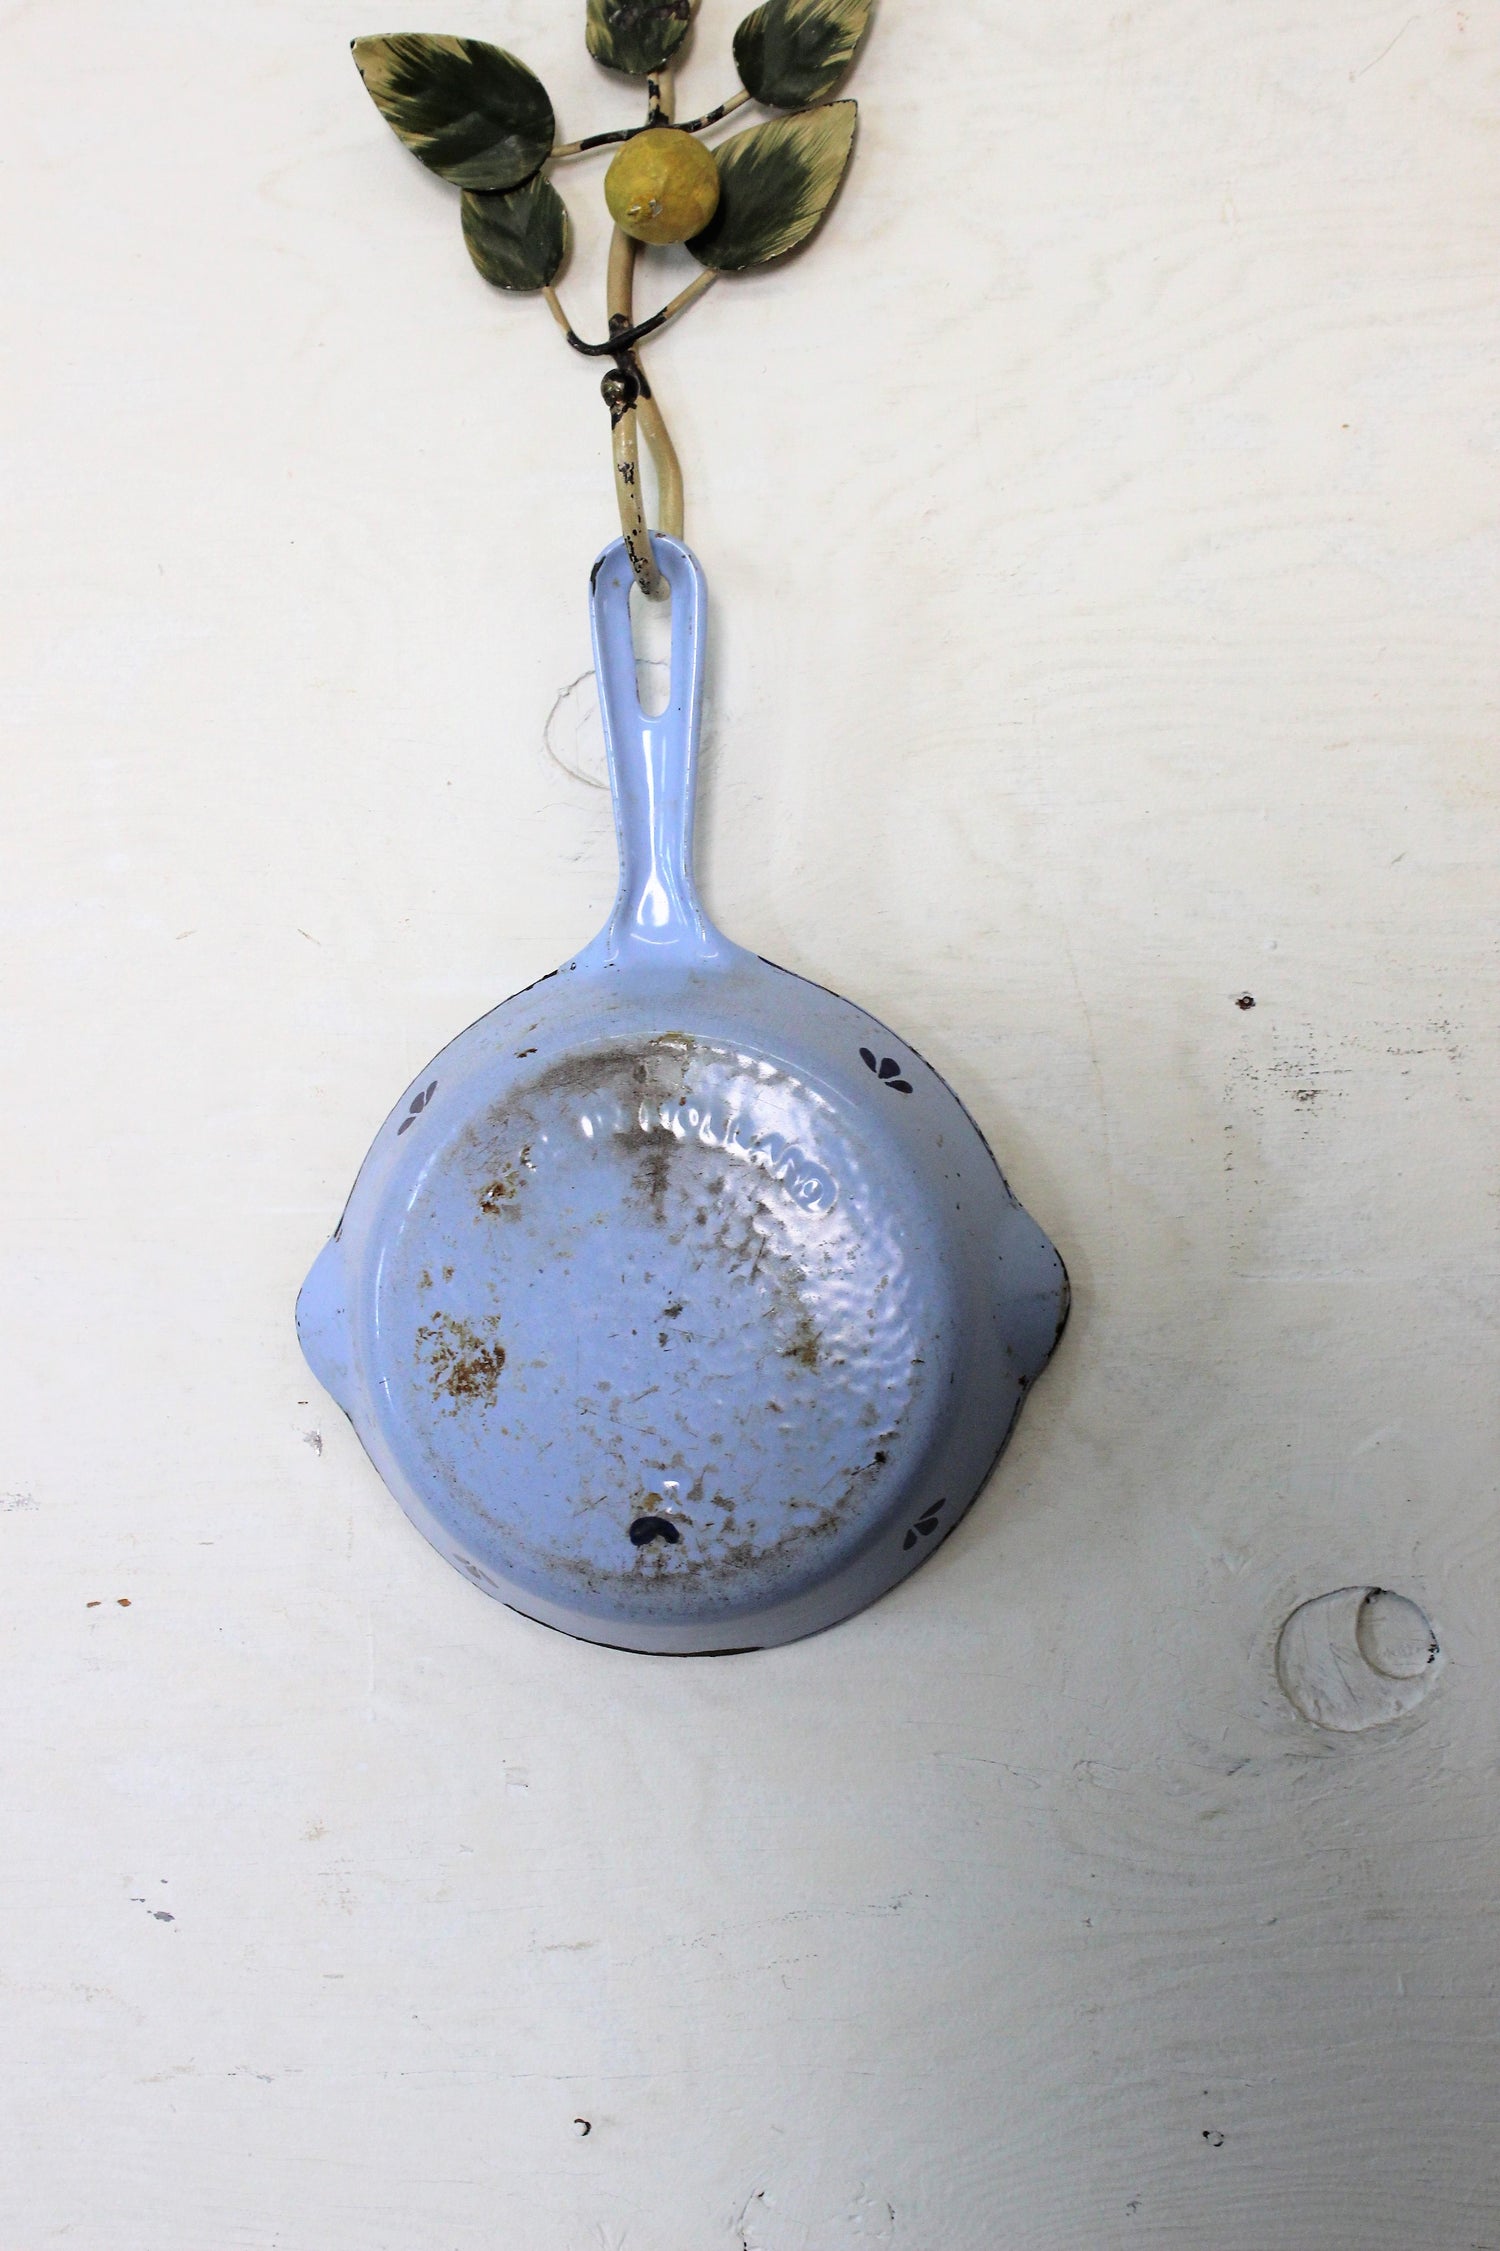 Vintage 1950s Dru Cast Iron Skillet Pan in Blue And White #17